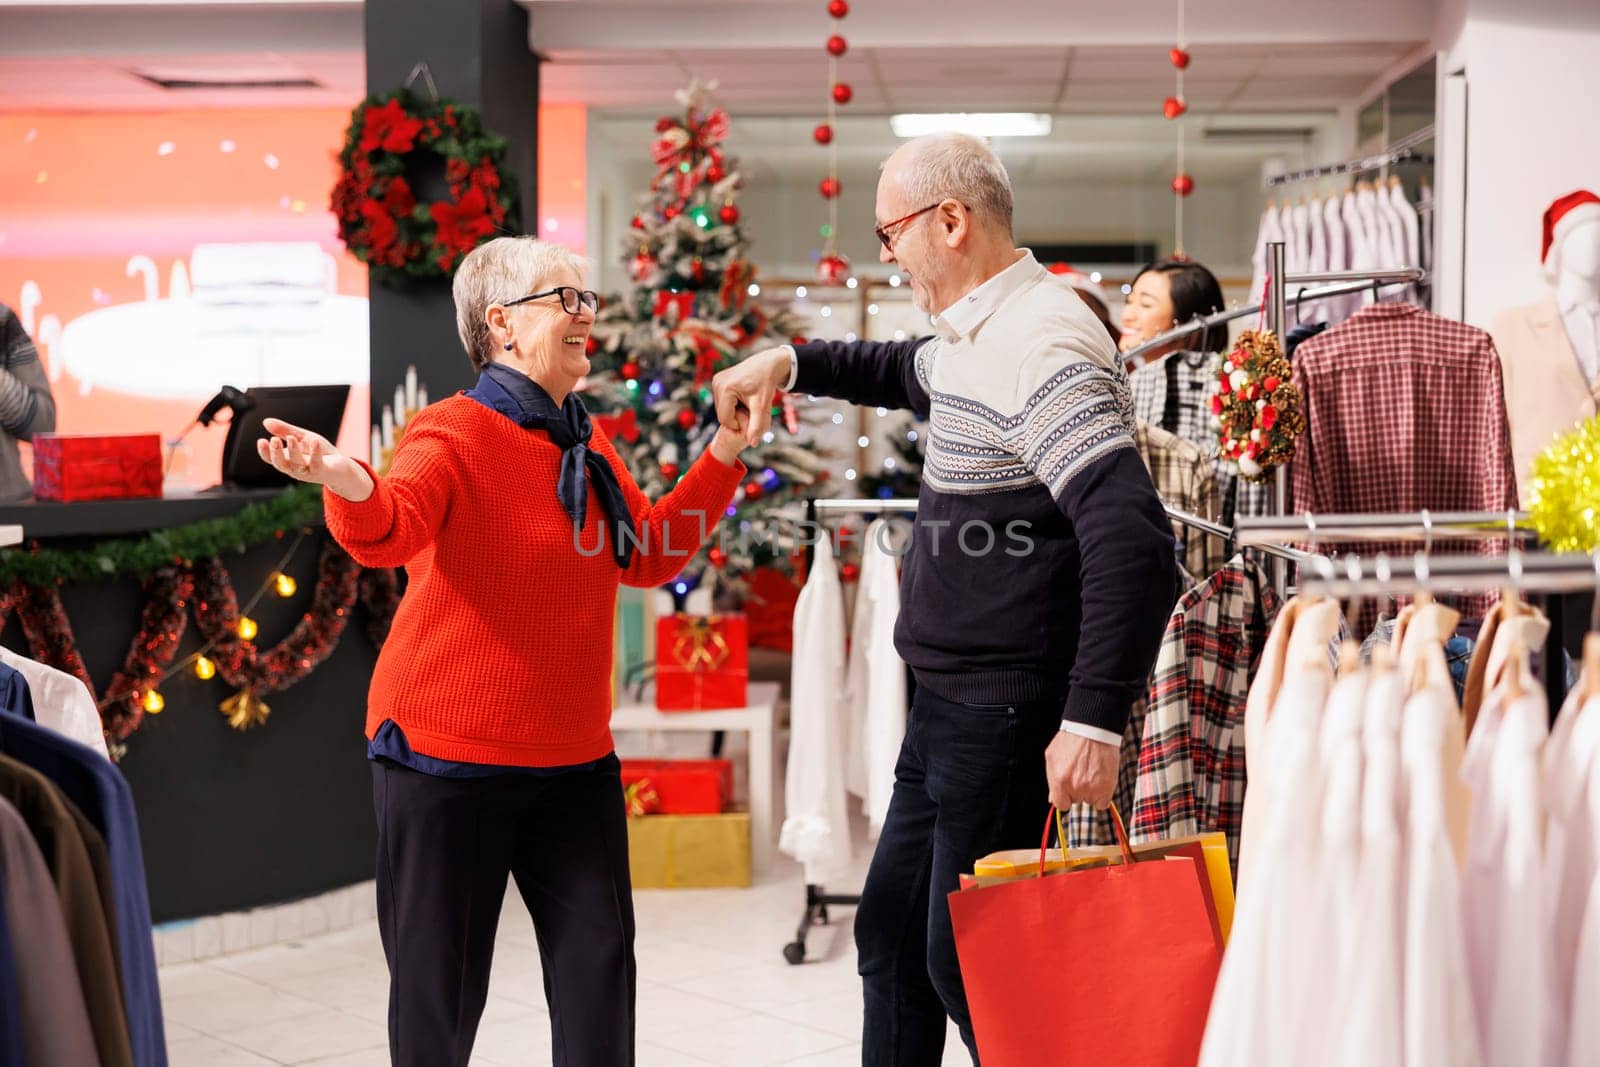 Romantic couple dancing in clothing store, enjoying shopping spree for presents to buy trendy clothes on sale. Joyful senior people showing cute dance moves near hangers and racks, sincere love.